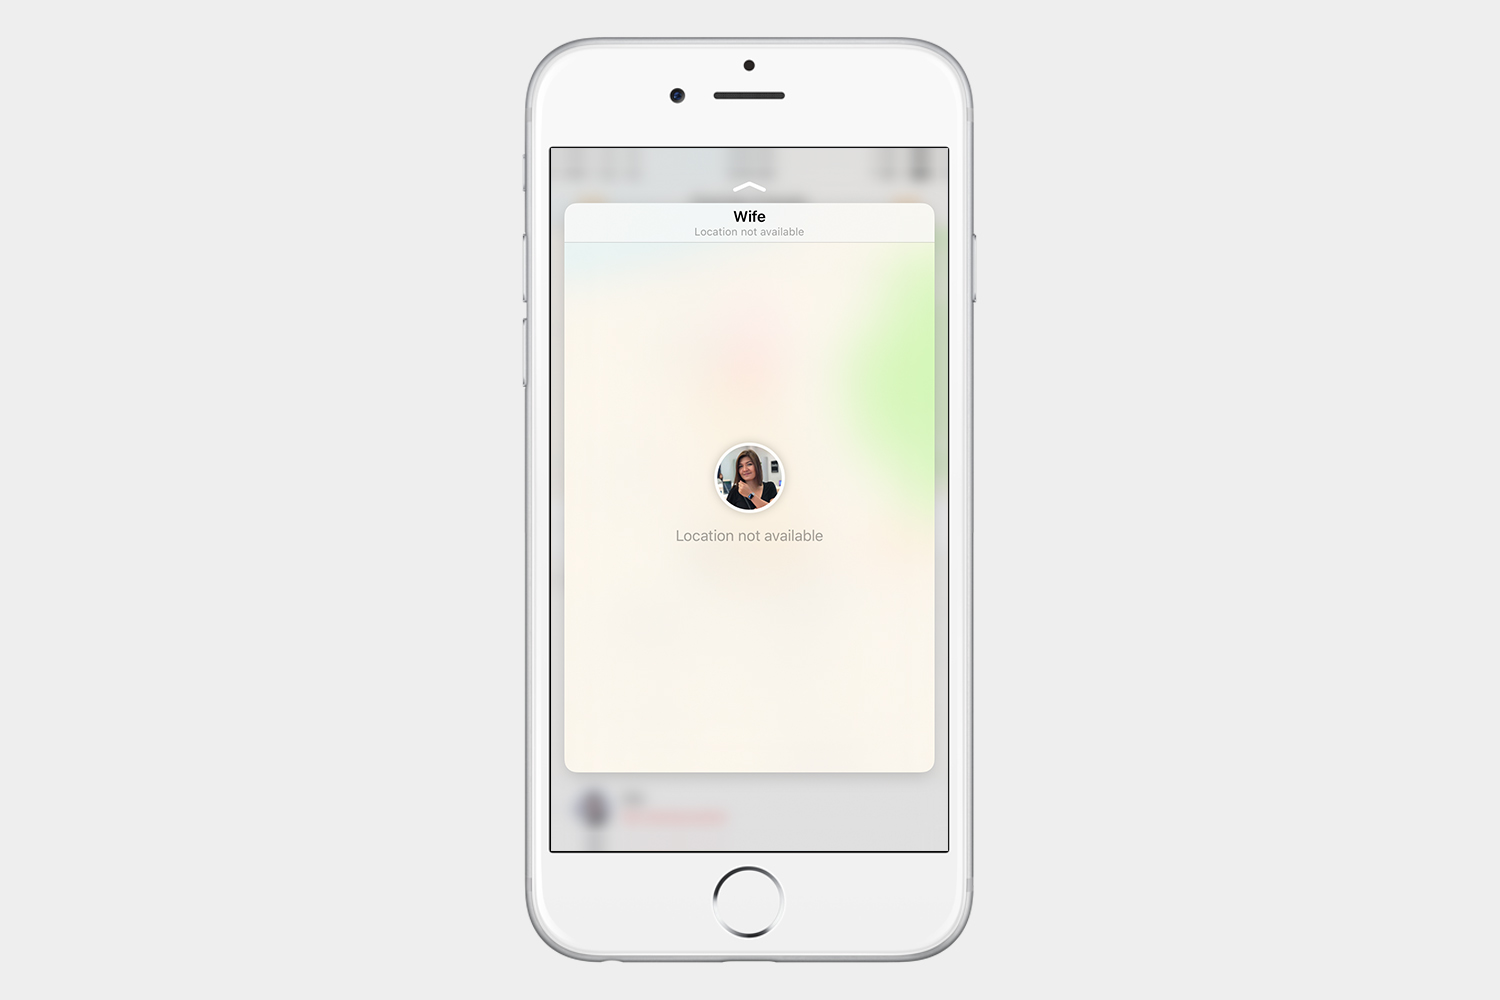 how to use find my friends ios 10 3d touch2